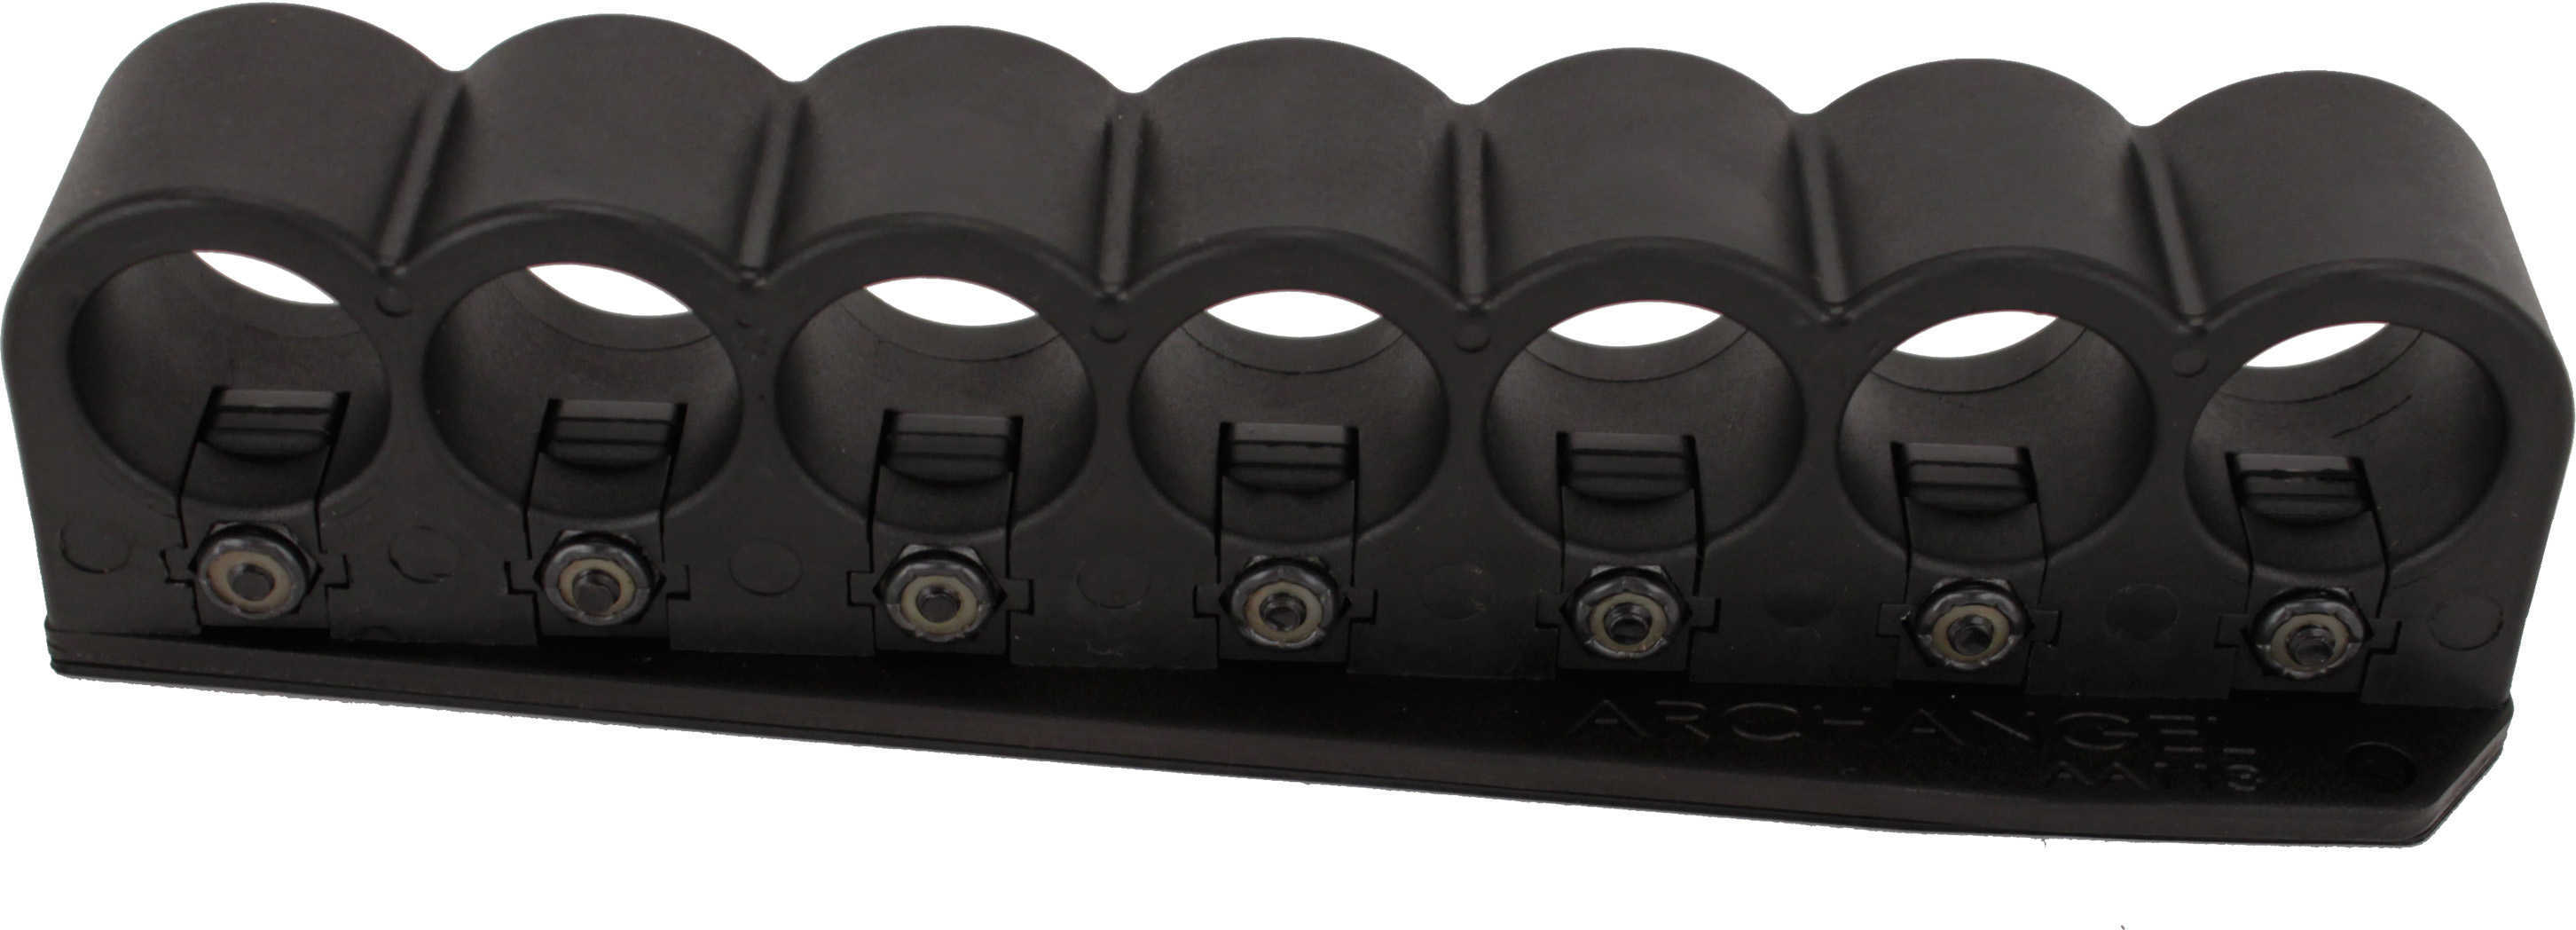 Promag Industries 7 Round Shell Holder